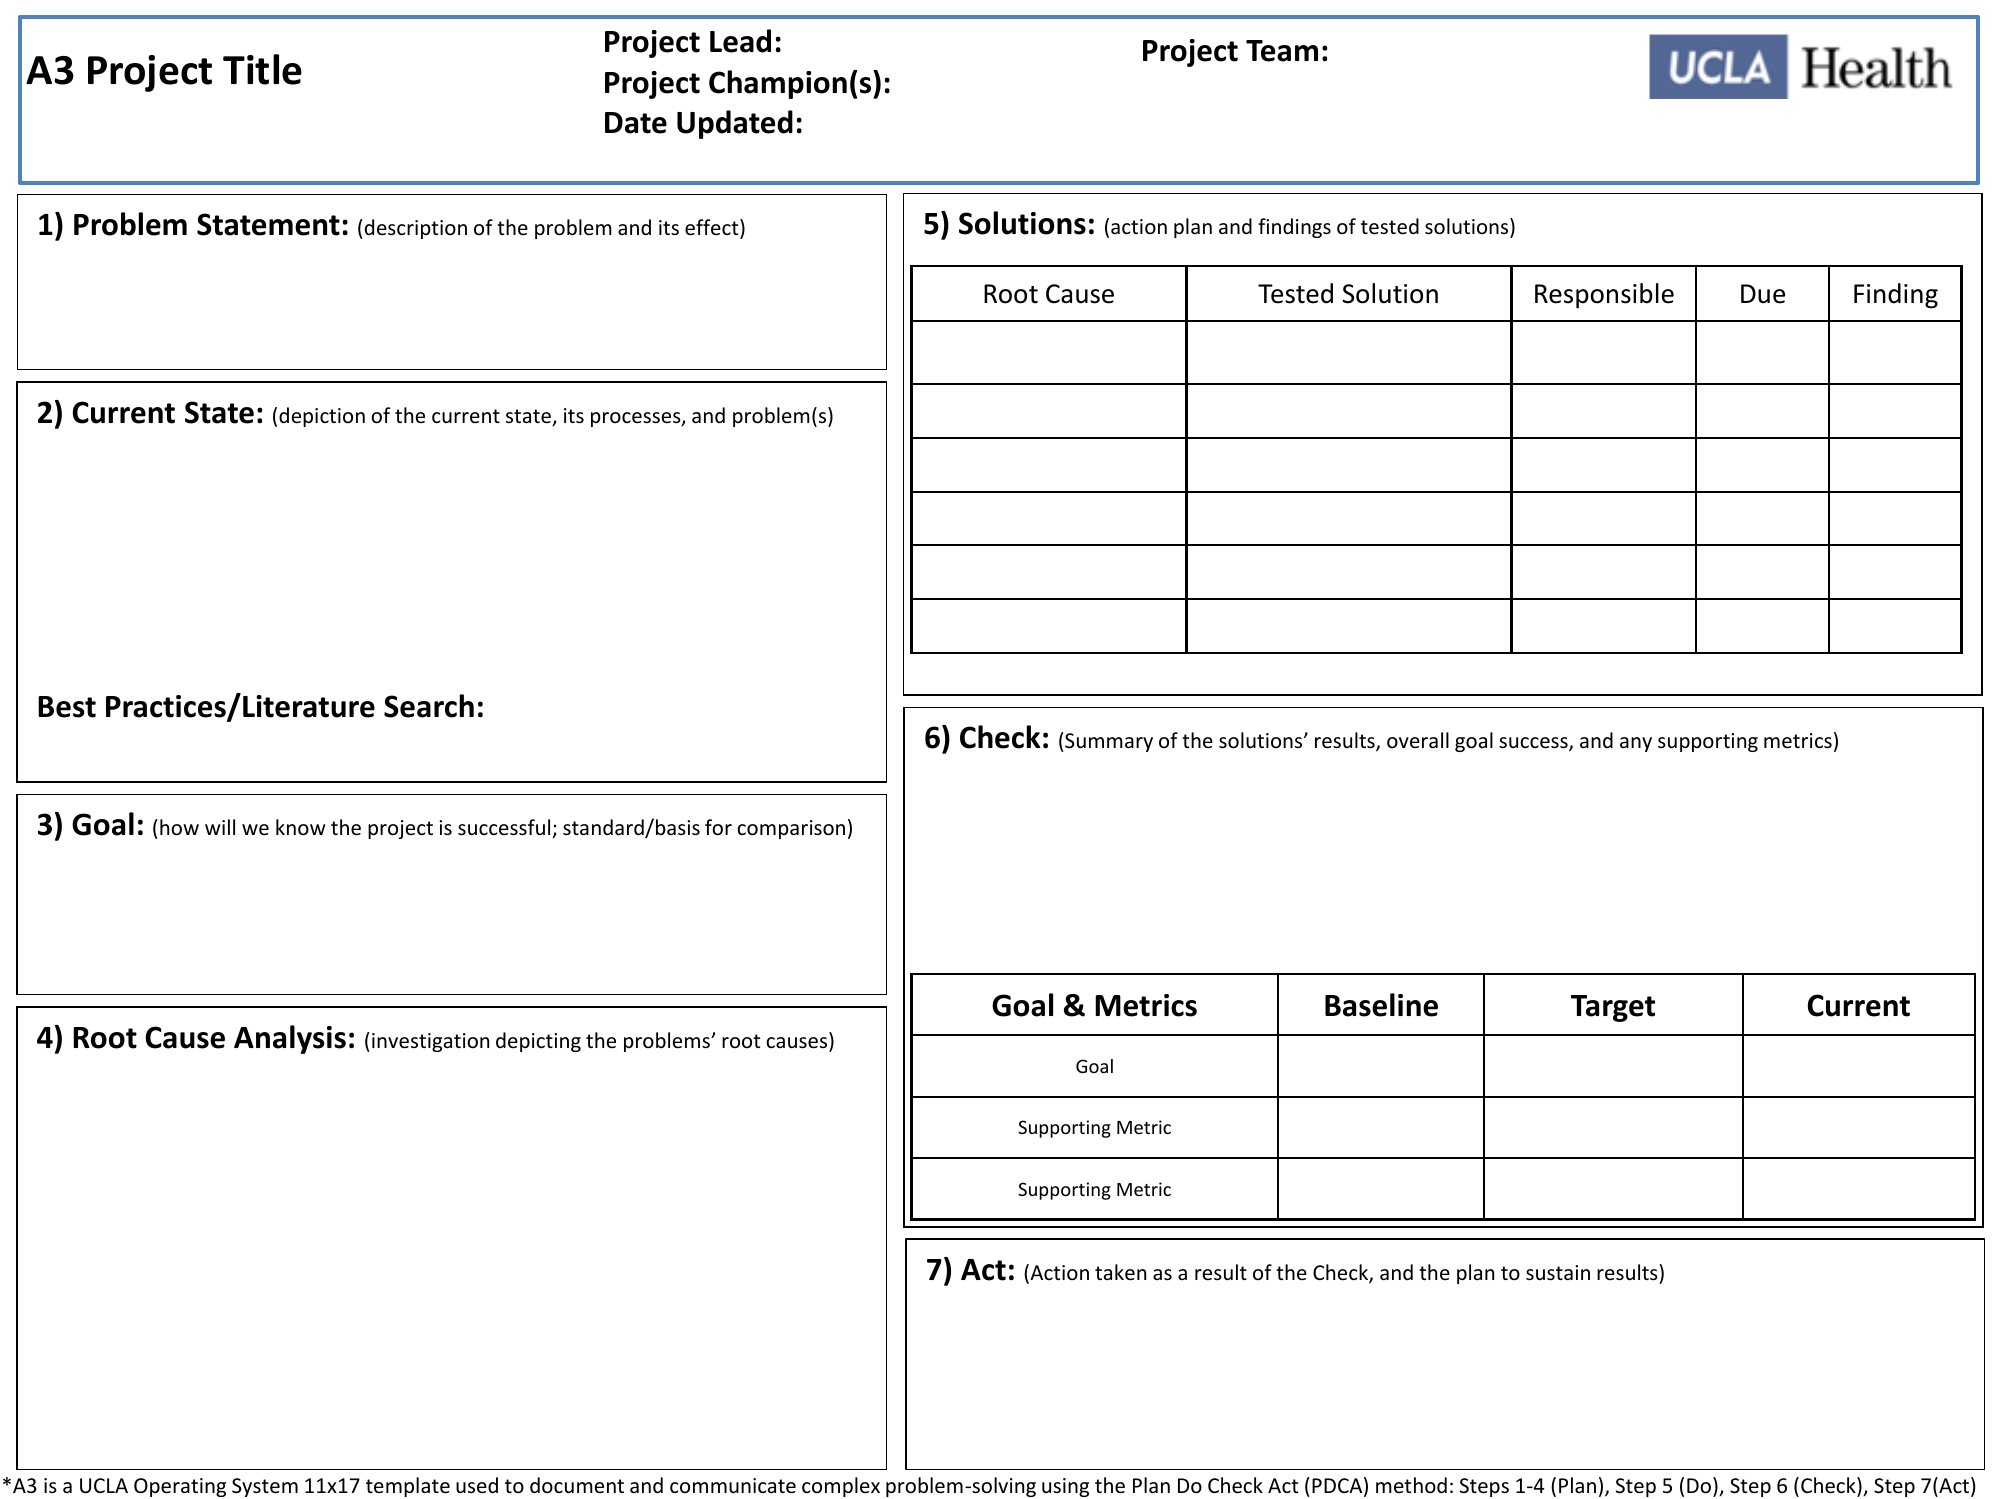 a3-template-one-of-our-many-free-lean-forms-riset